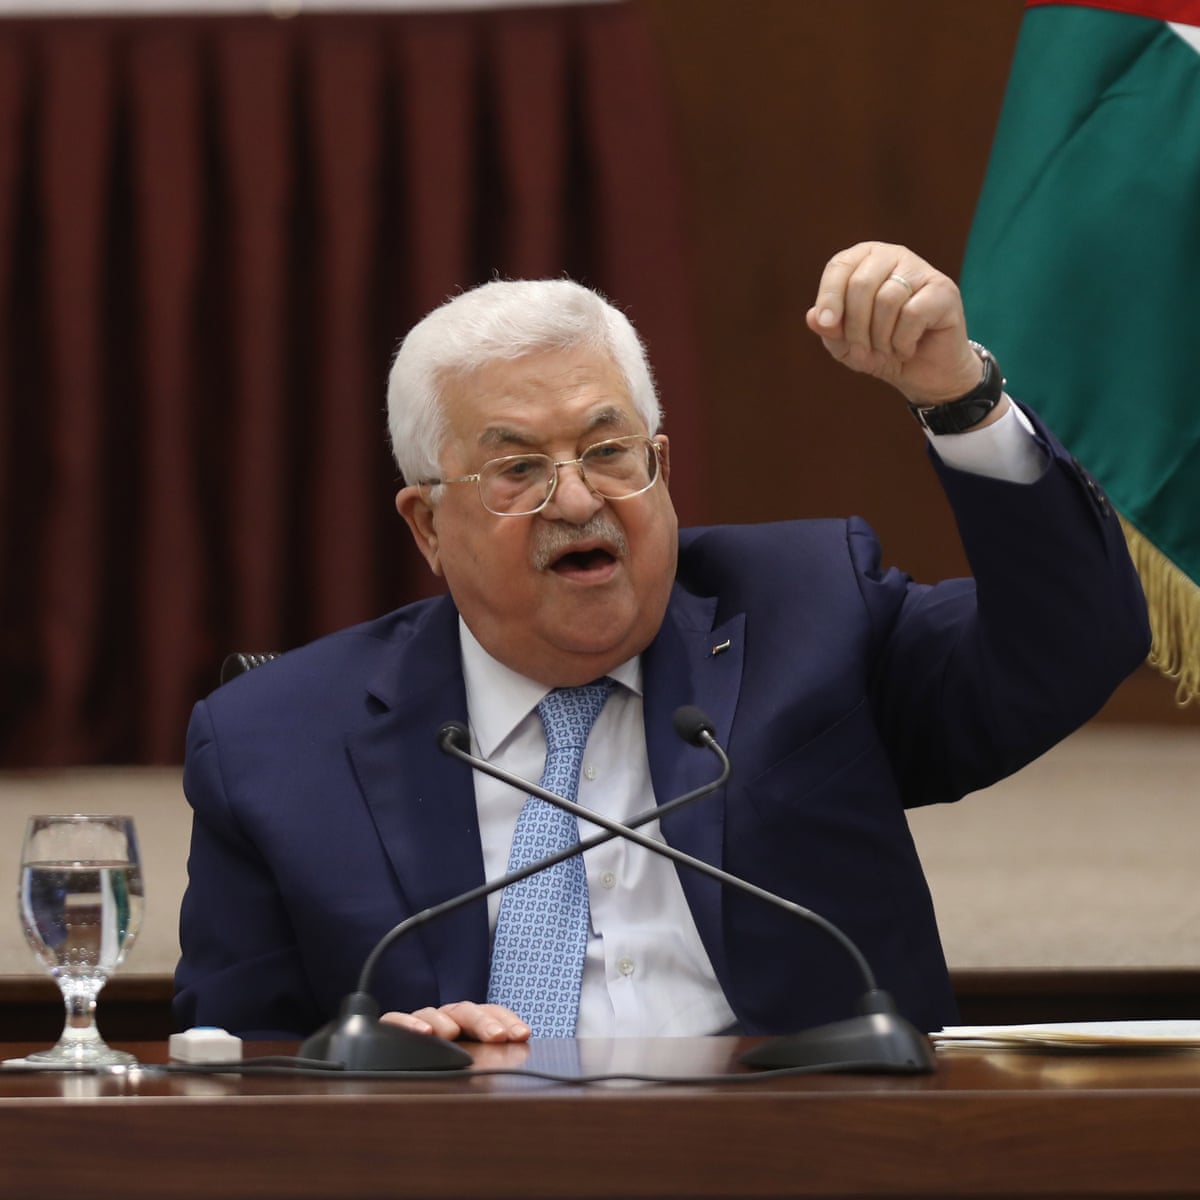 Palestinian leader Mahmoud Abbas ends security agreement with Israel and US | Palestinian territories | The Guardian